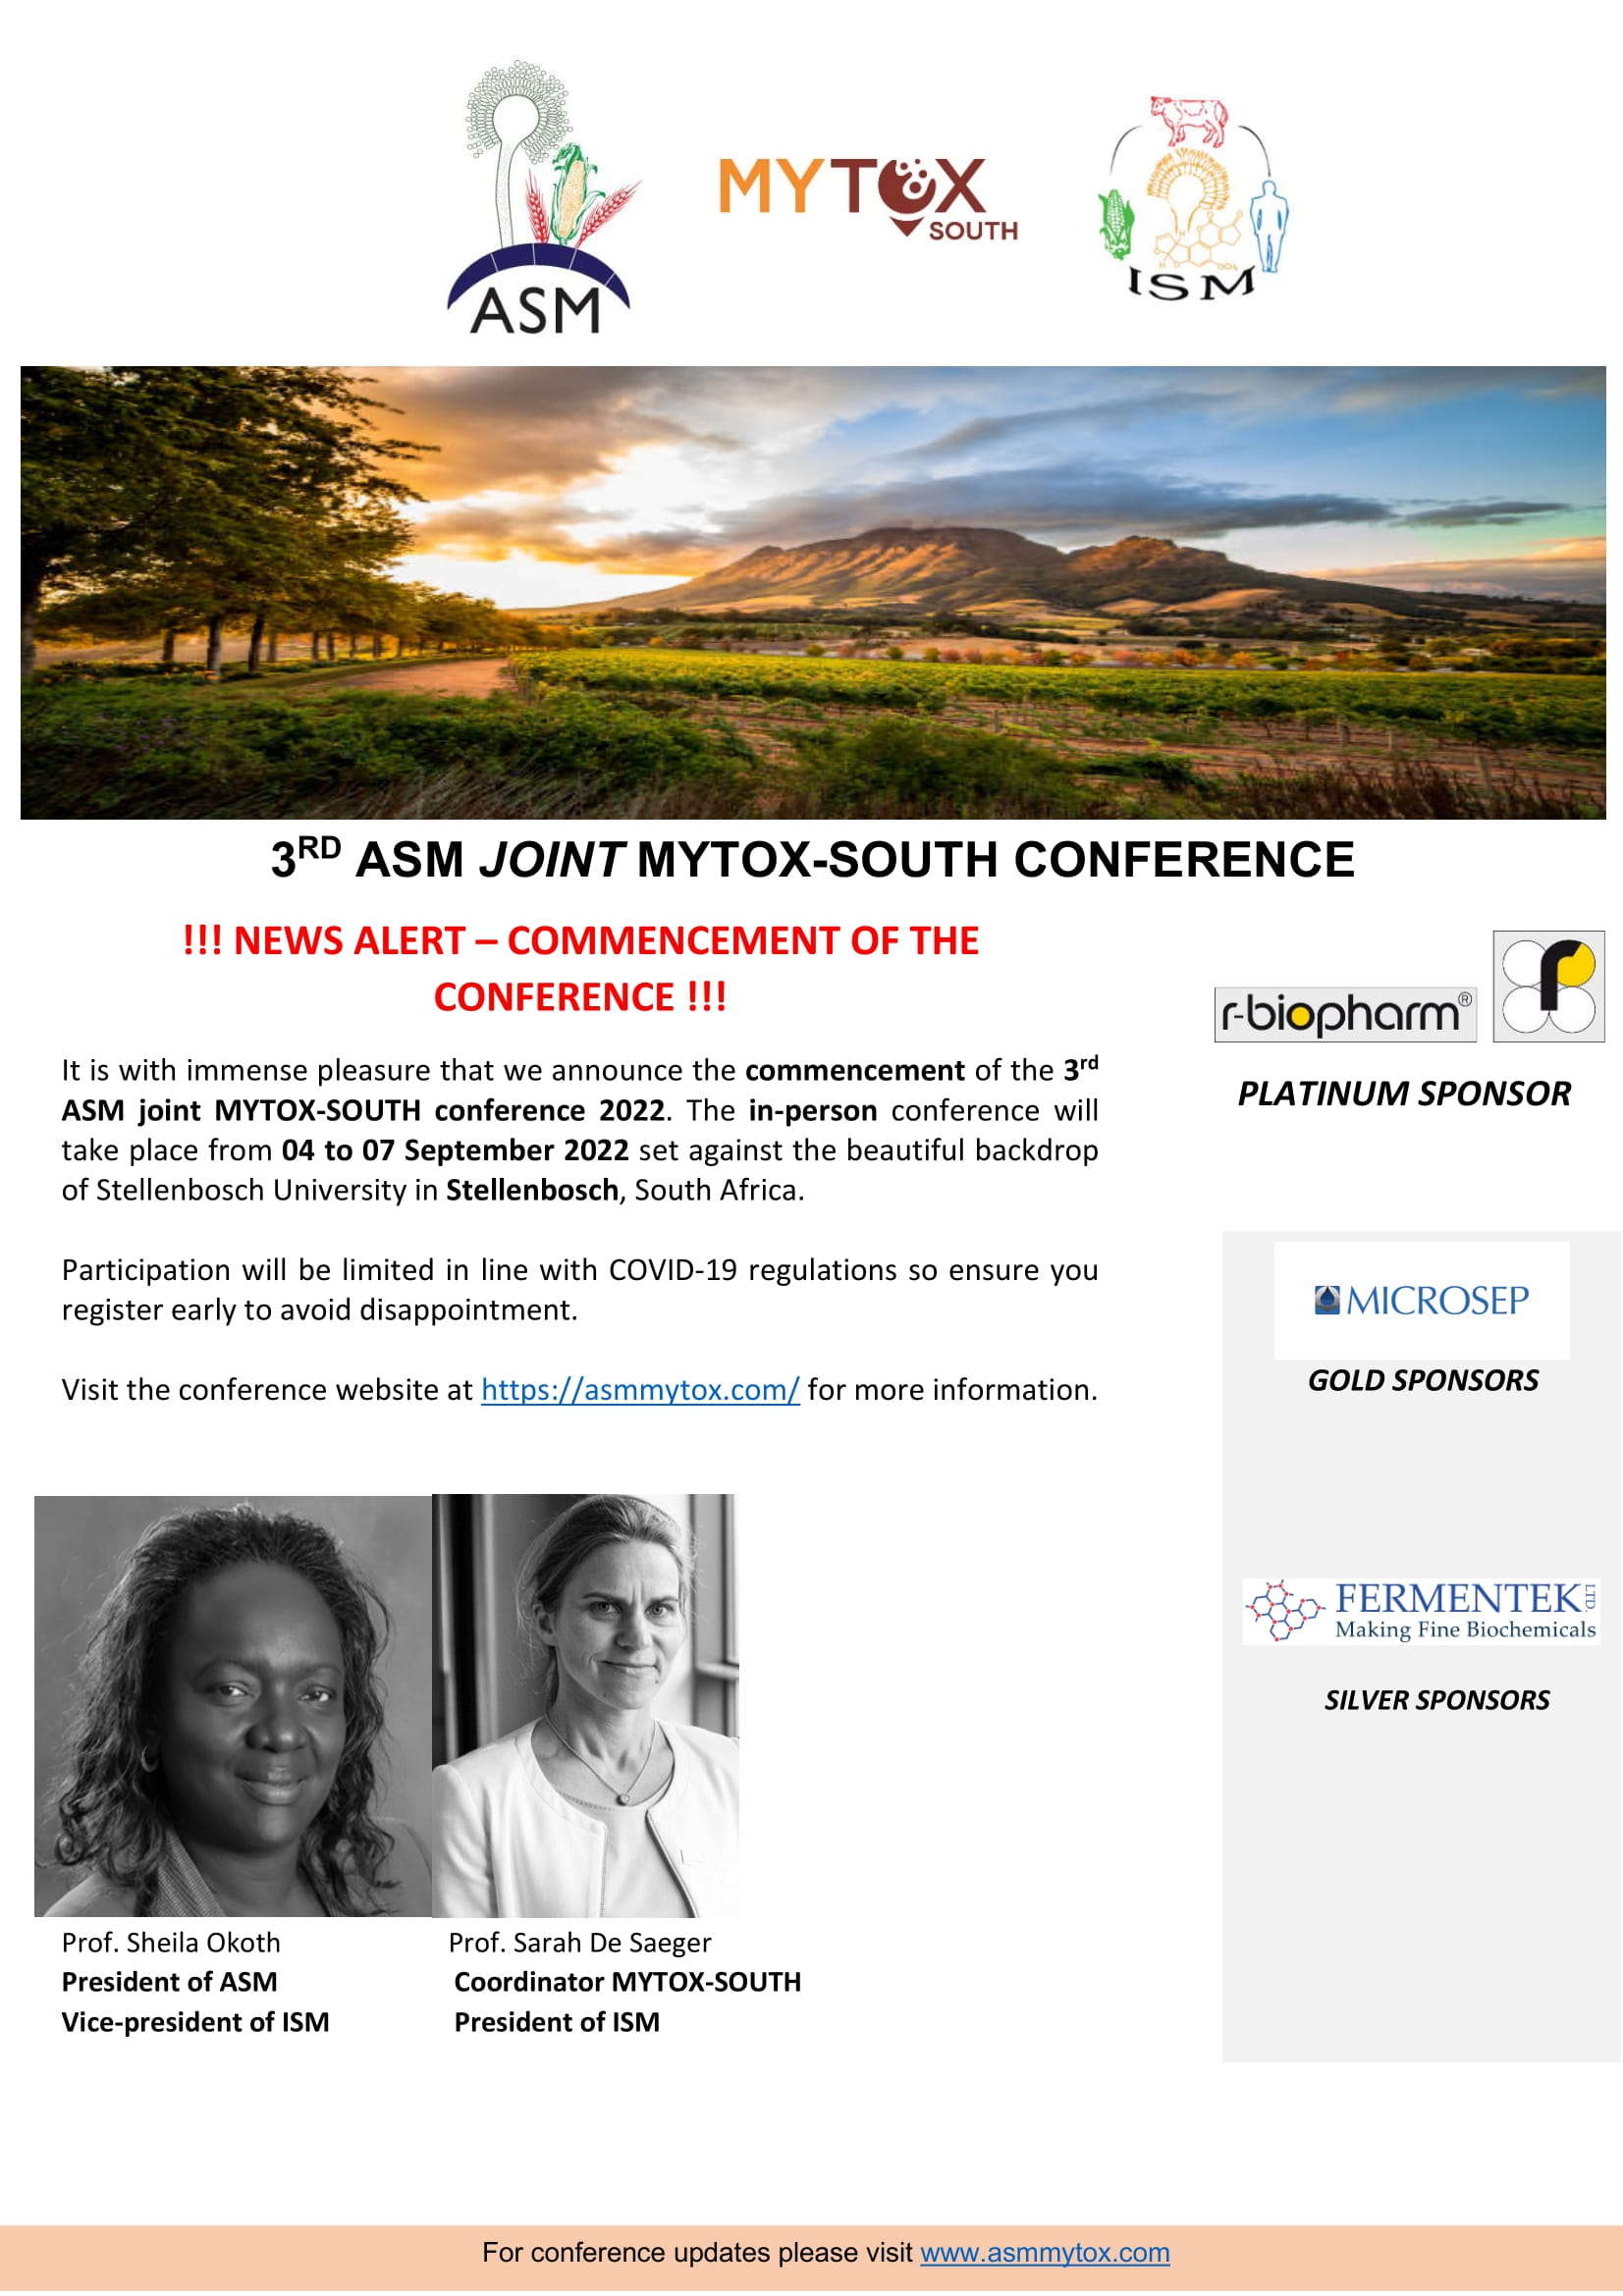 3rd Joint African Society of Mycotoxicology & Mytox South Conference